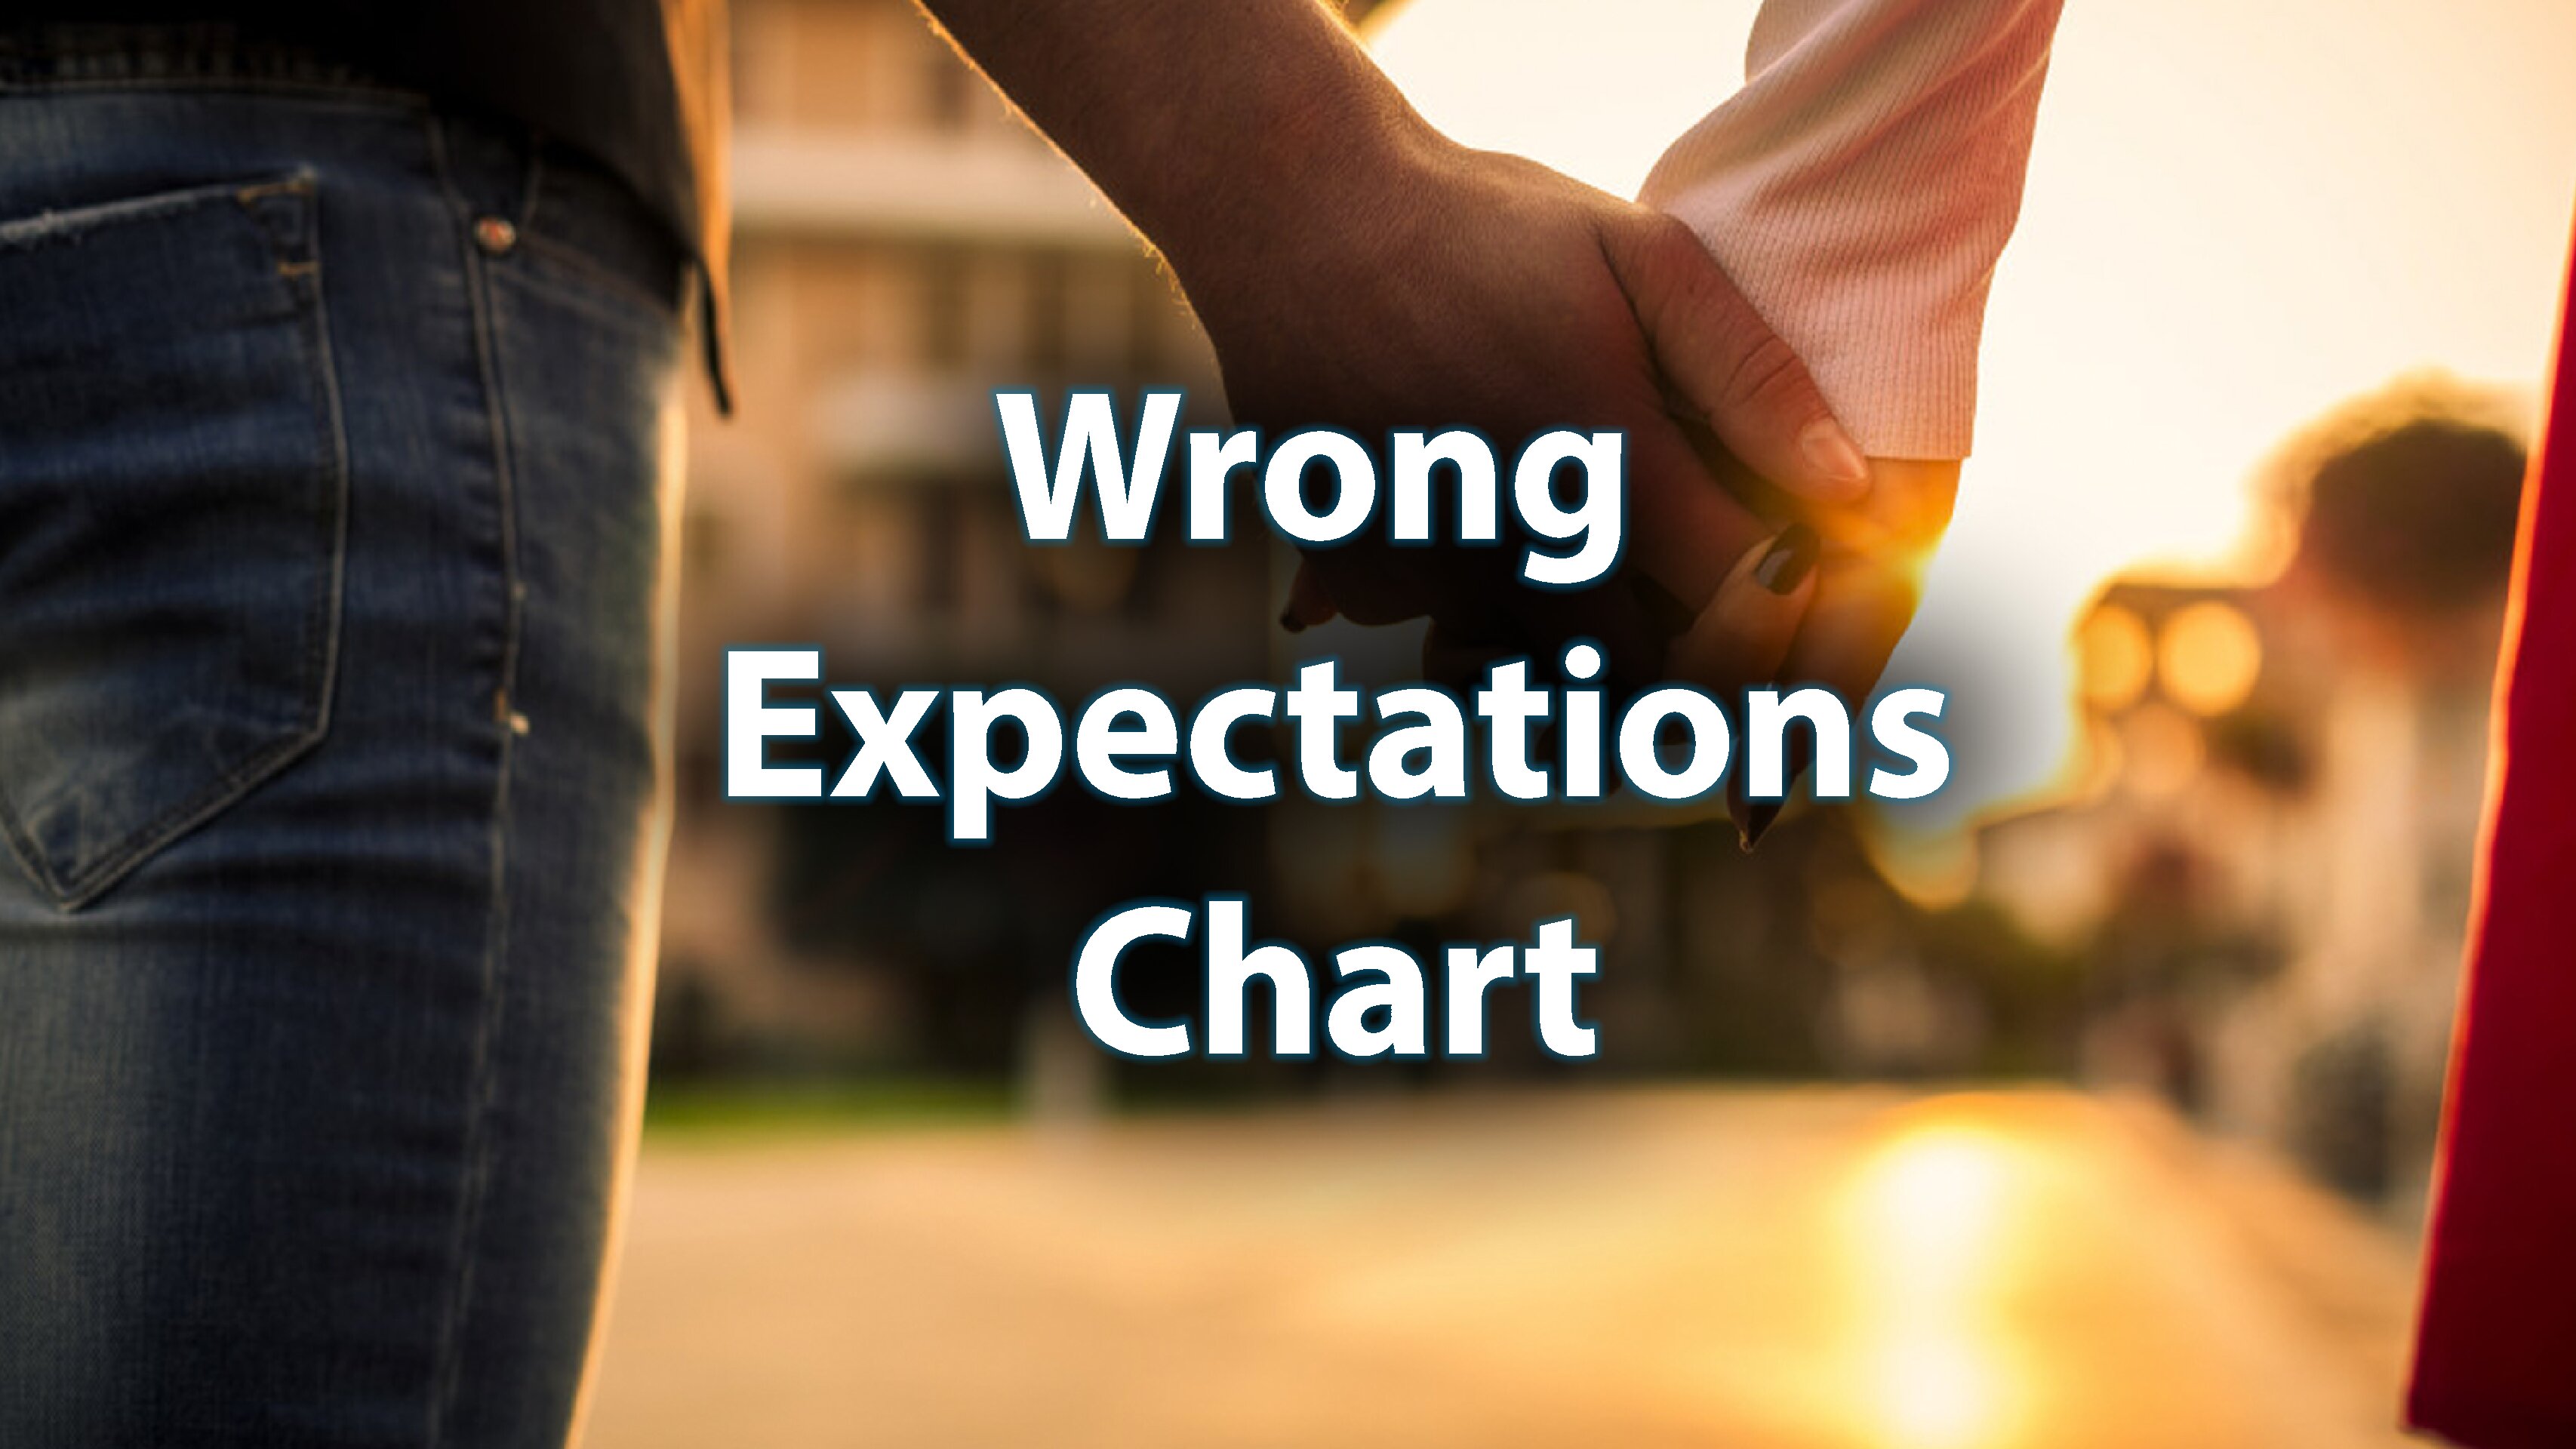 Day 3: Wrong Expectations Chart